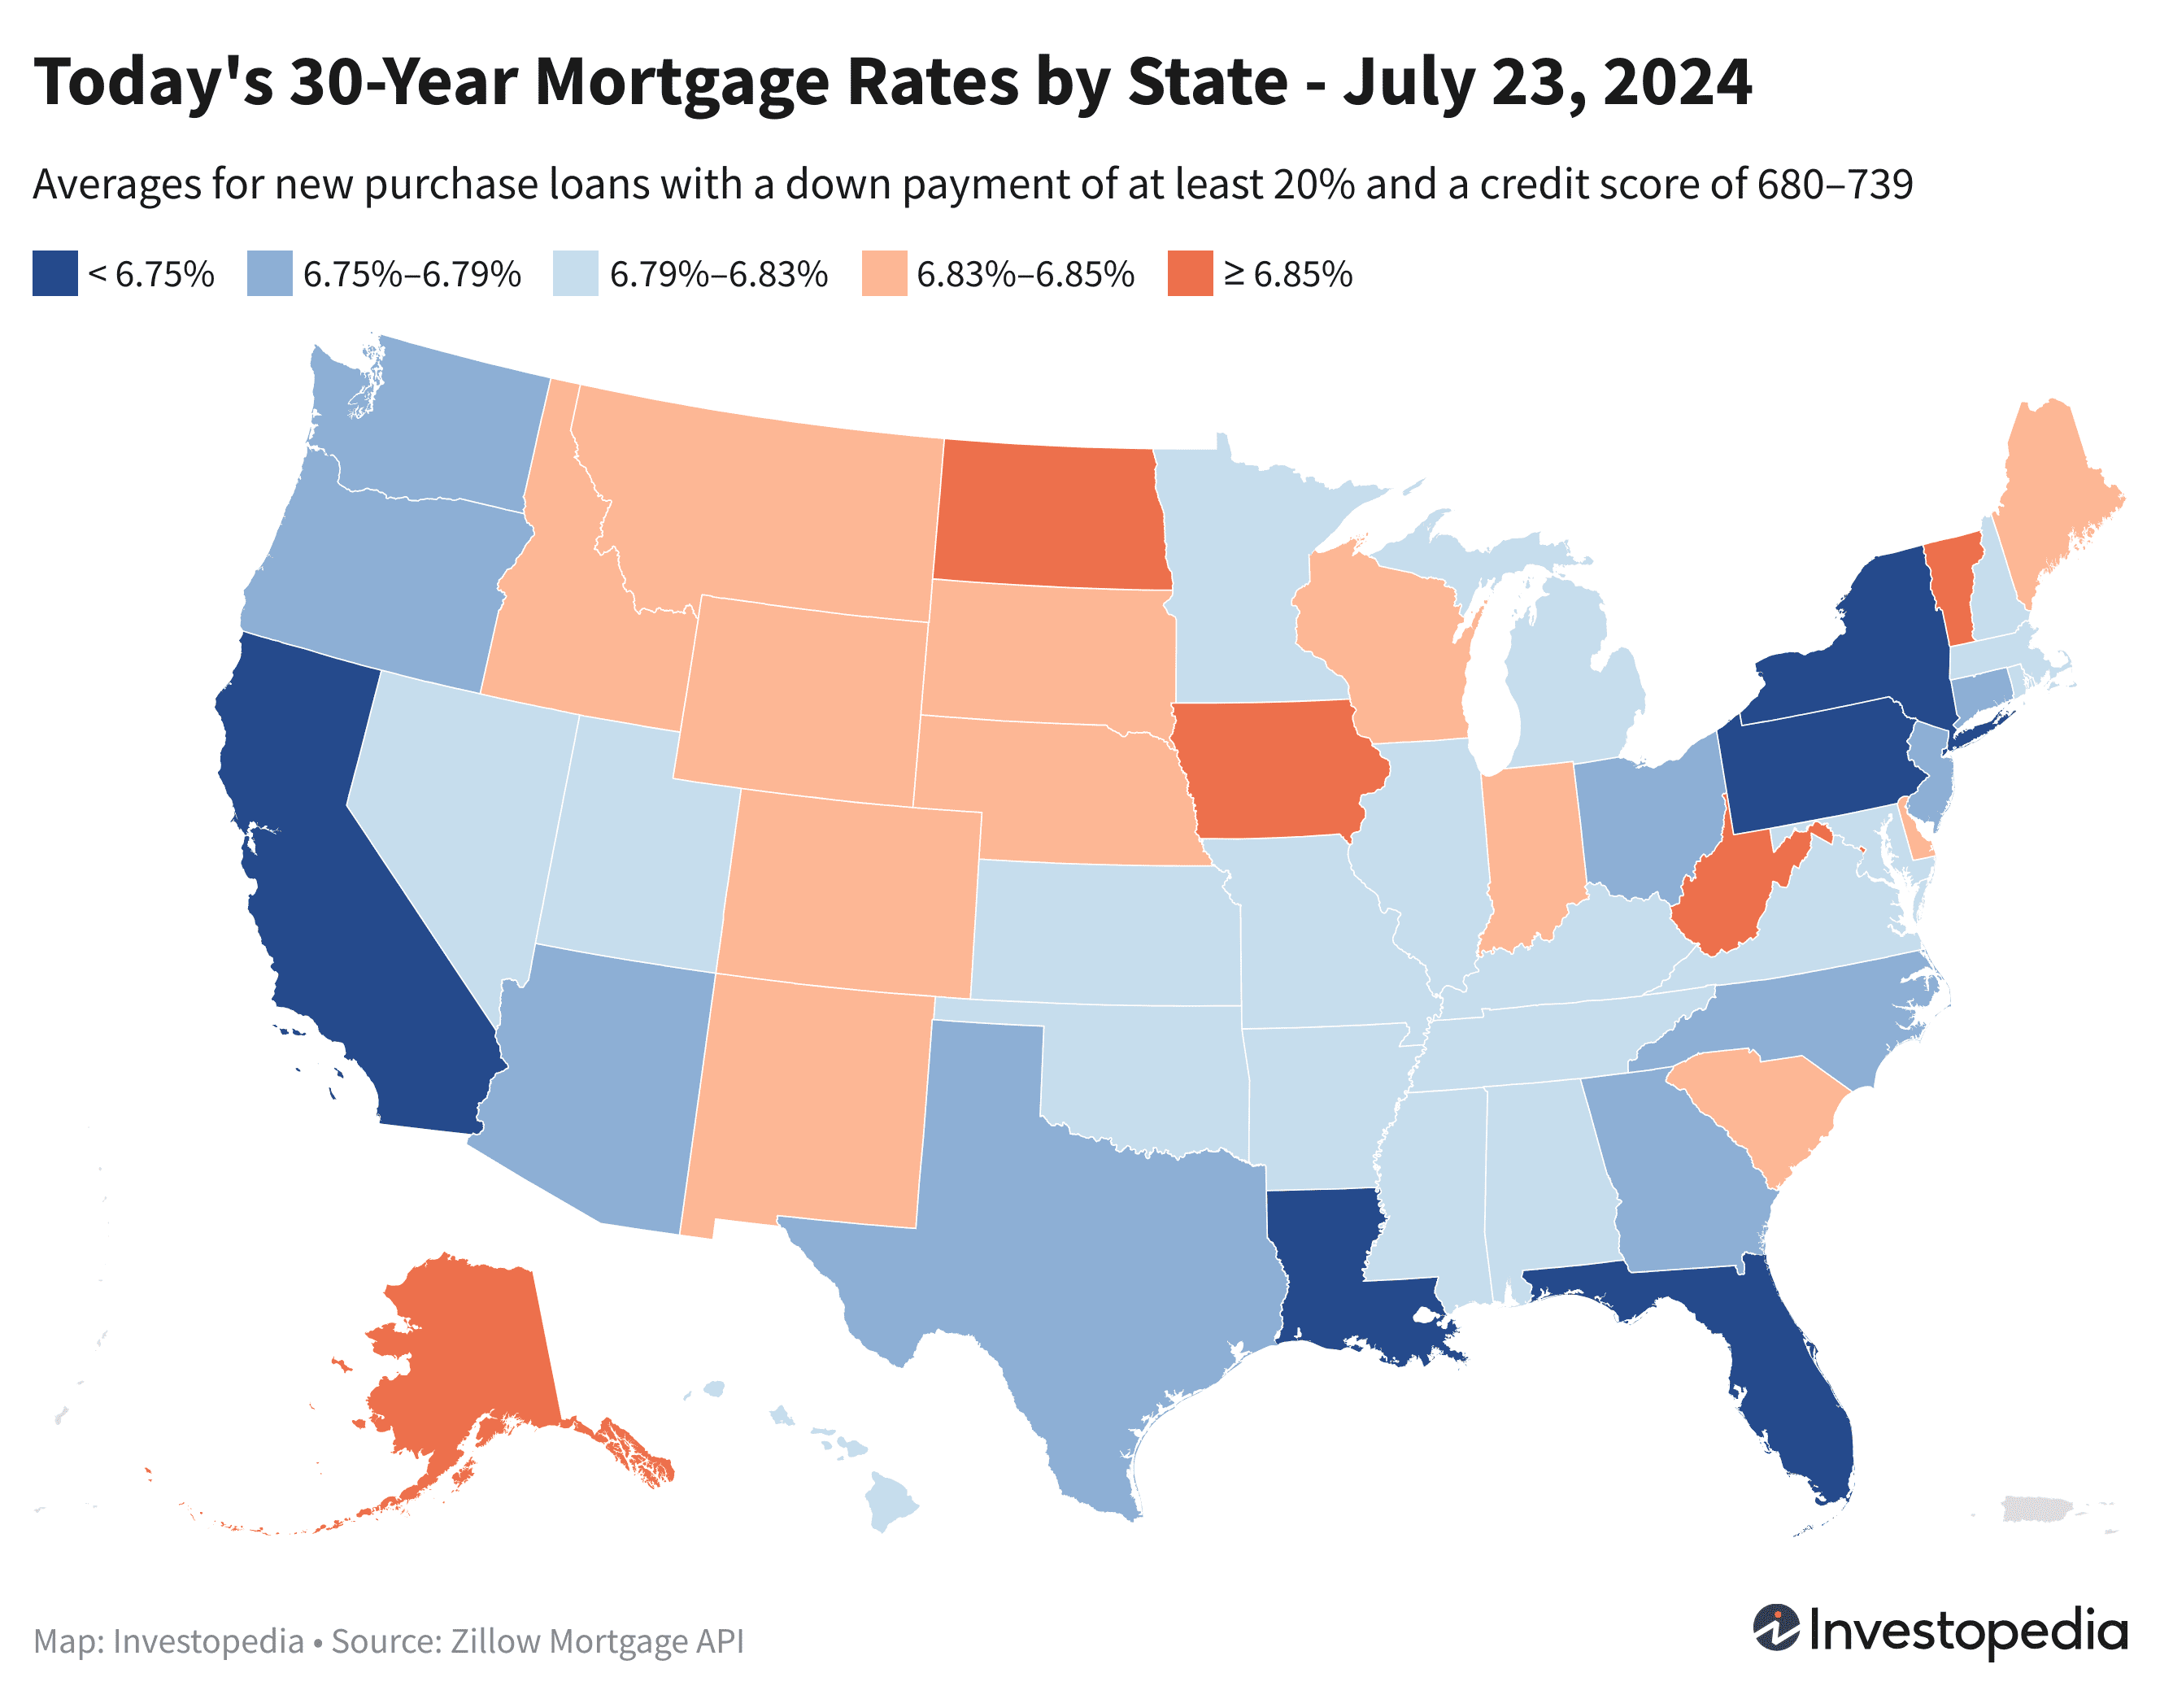 Map of today's 30-year mortgage rates by state - July 23, 2024